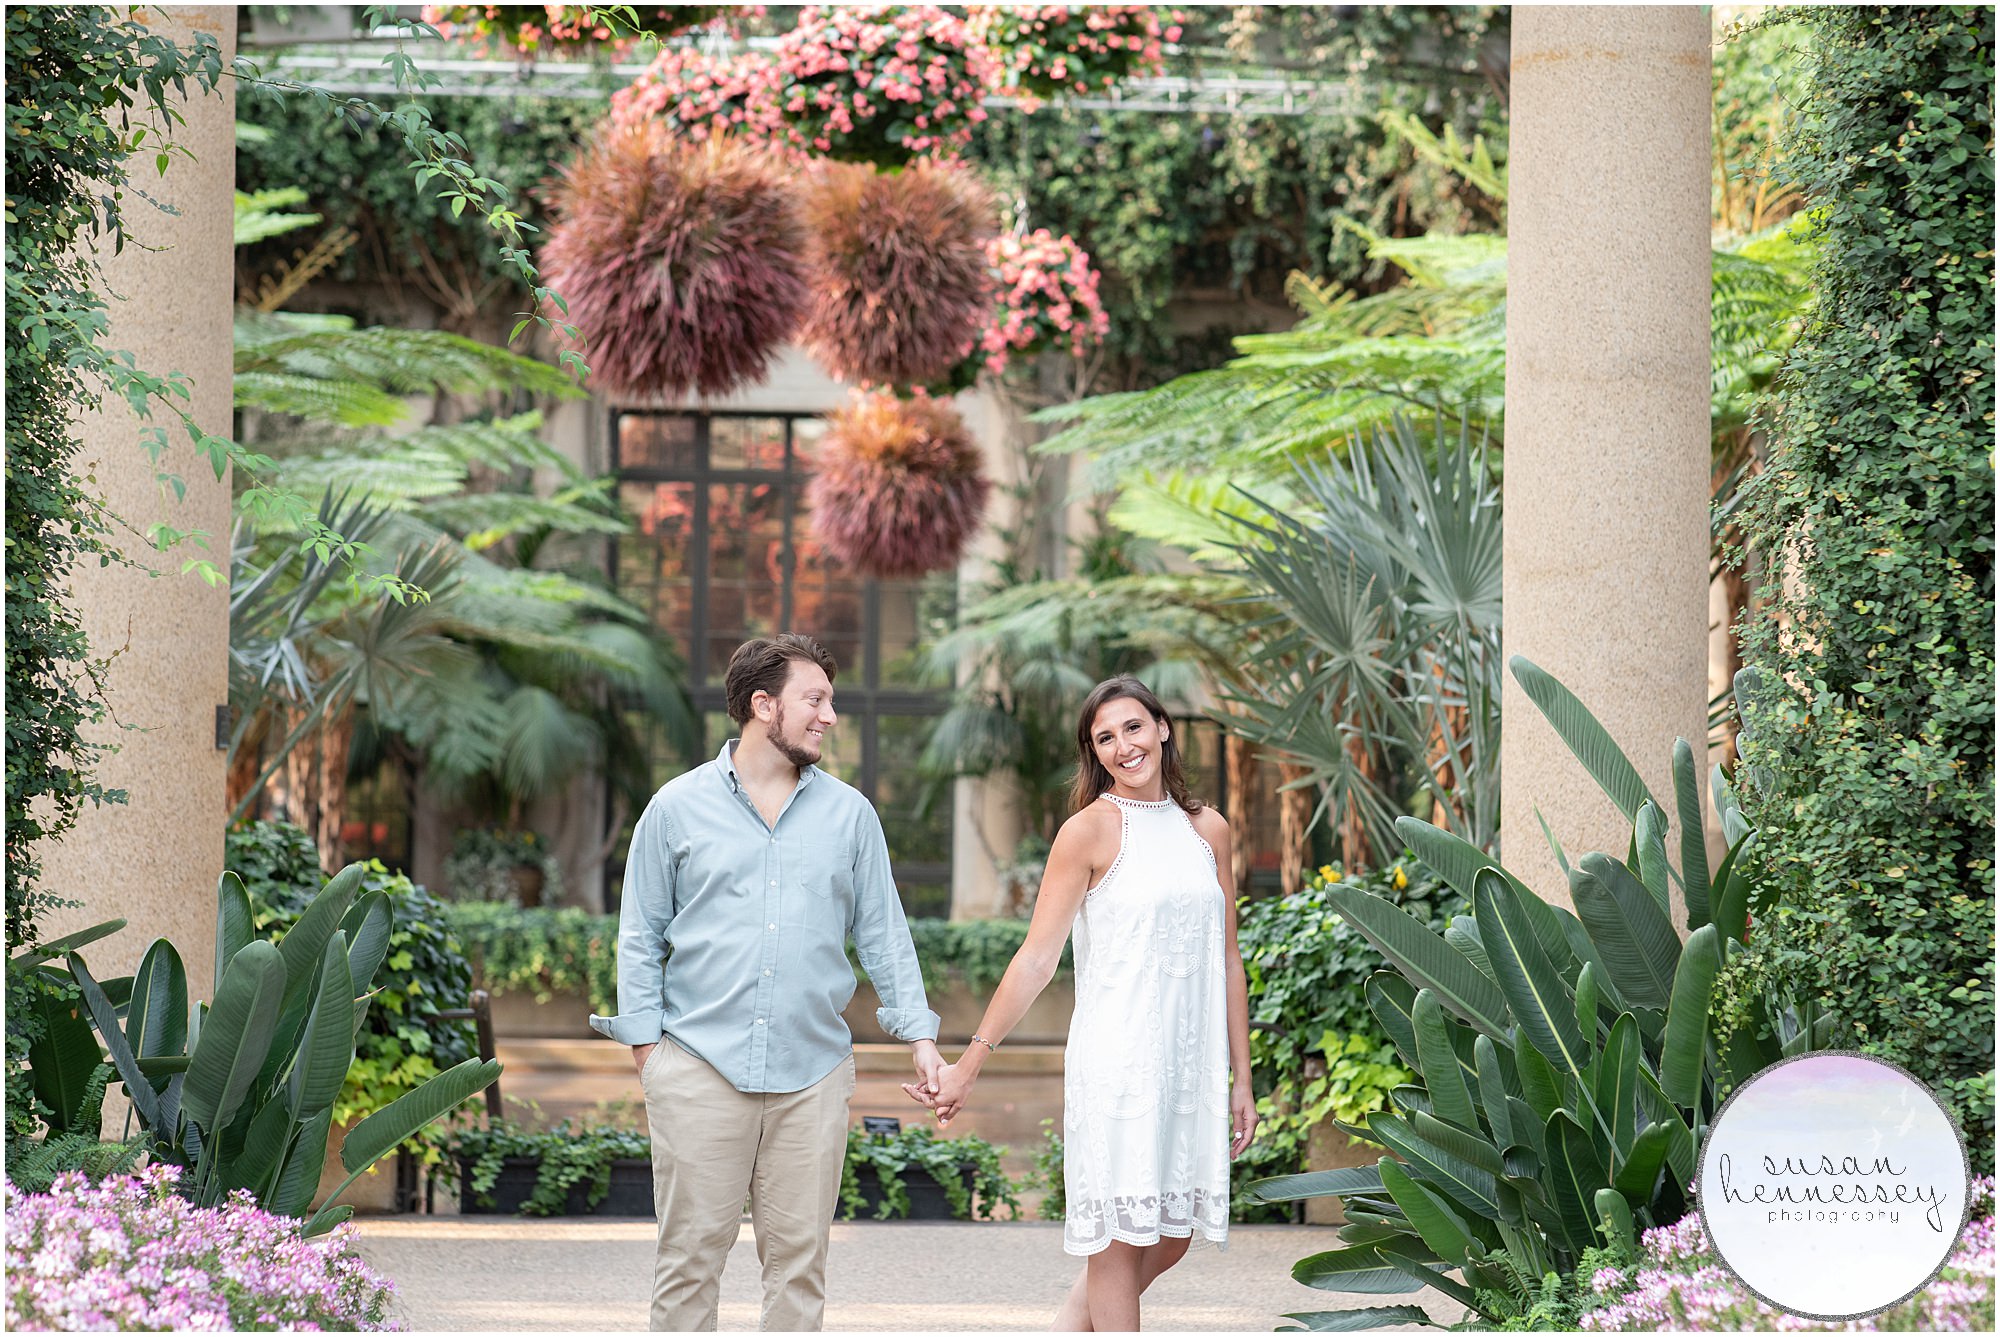 An indoor photography session at Longwood gardens